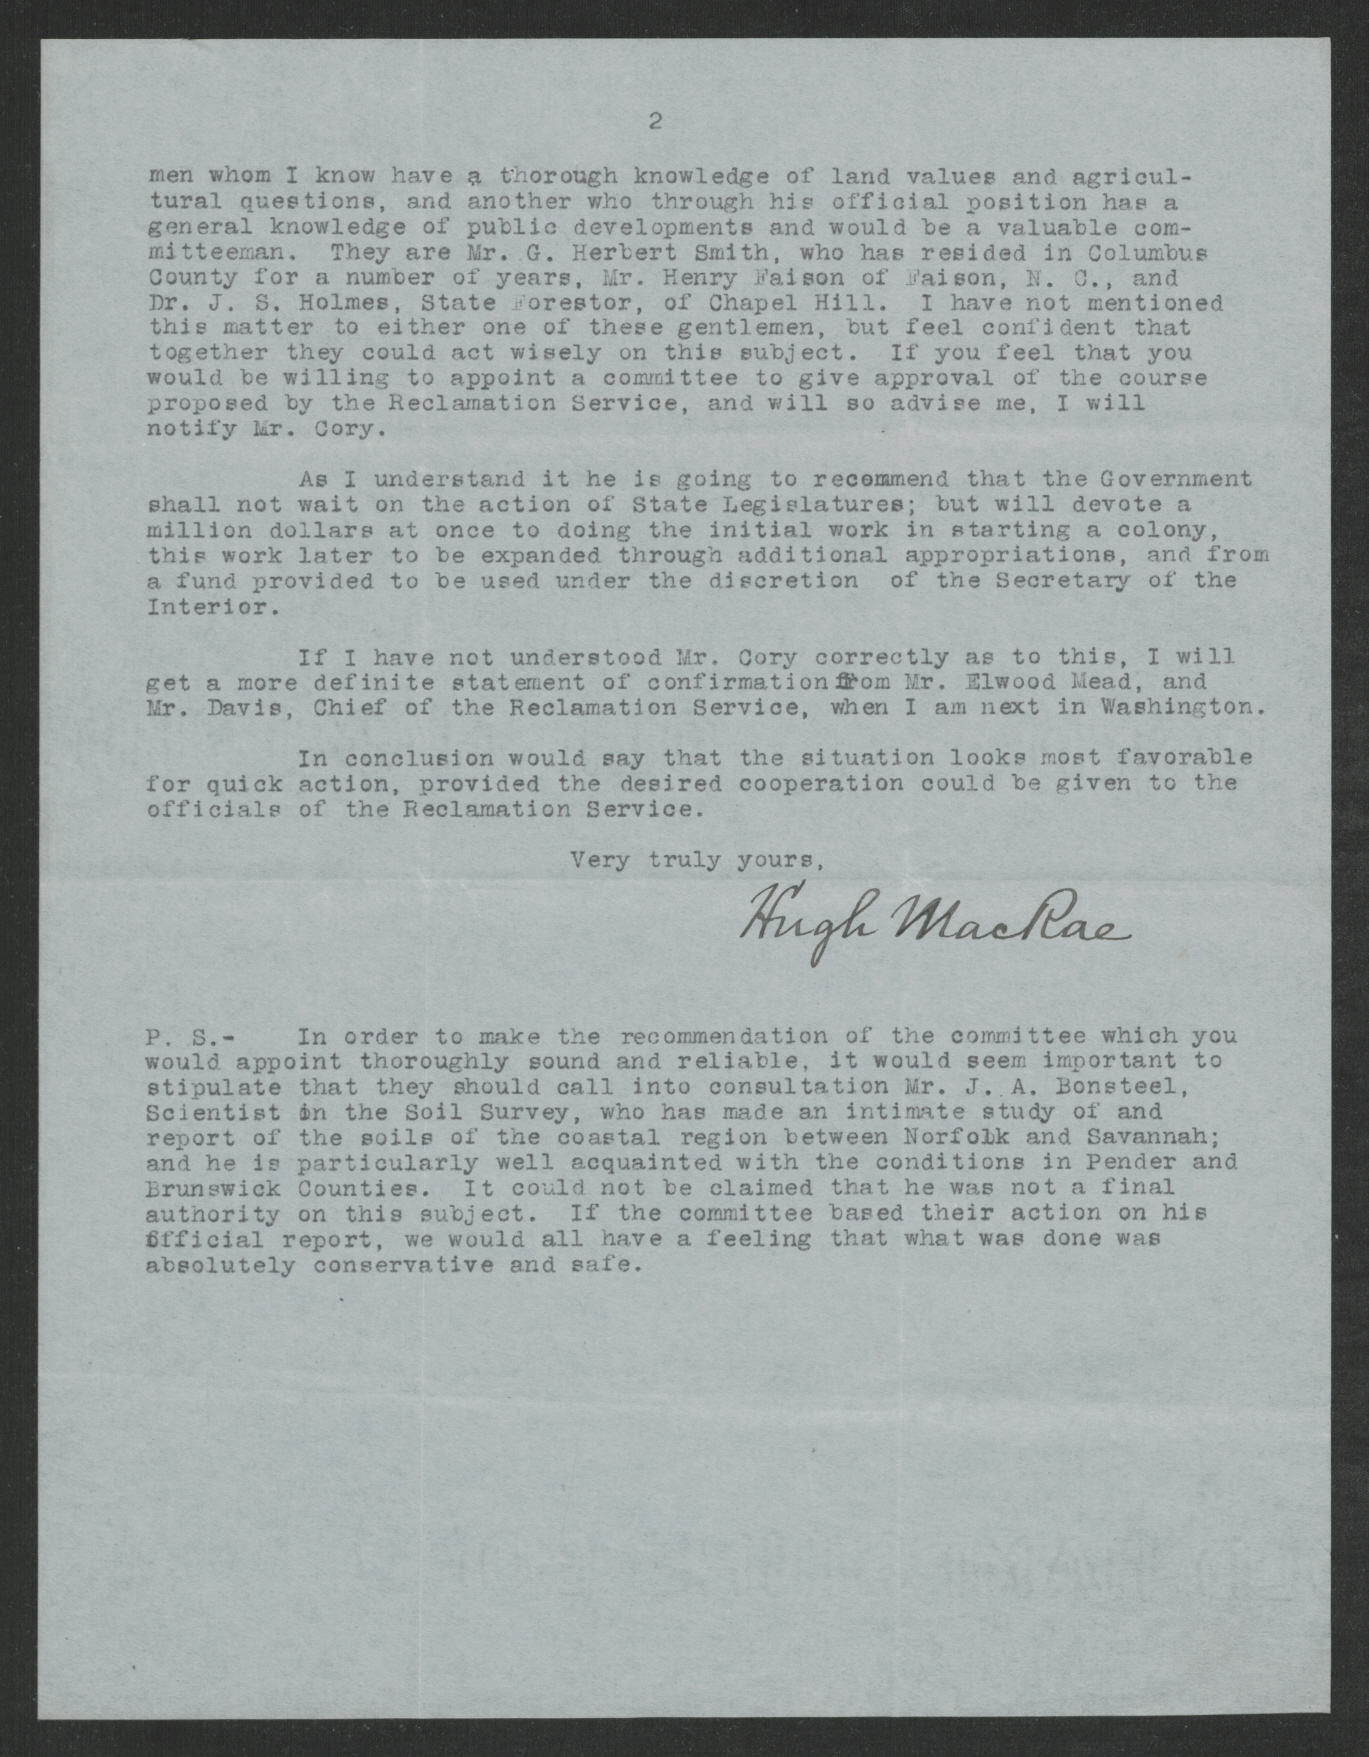 Letter from Hugh MacRae to Thomas W. Bickett, December 12, 1918, page 2